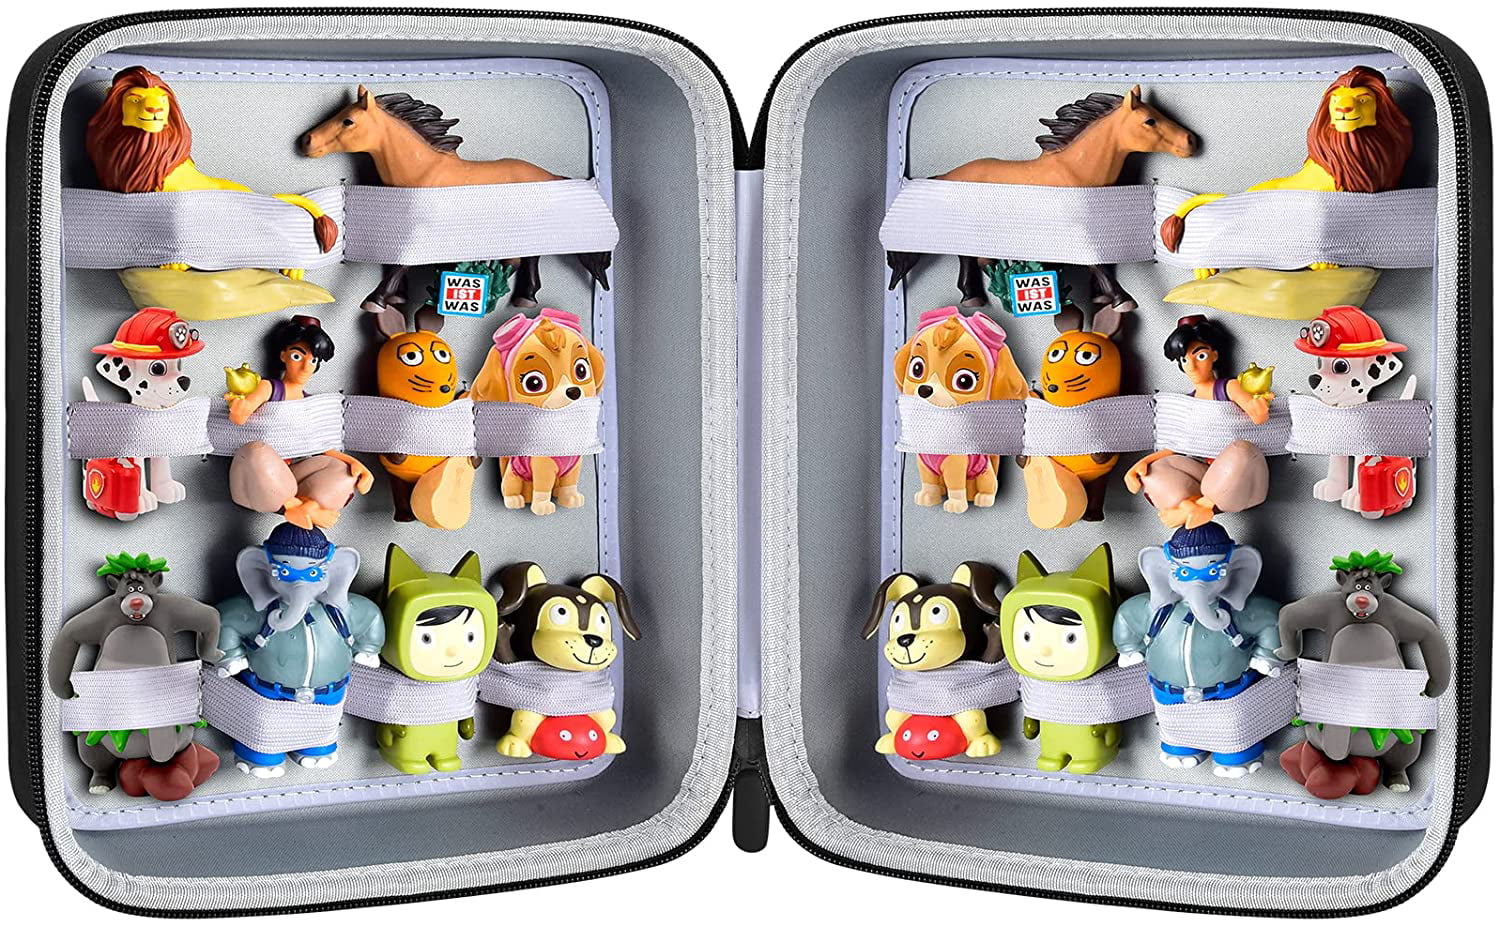 Case Comaptible with Toniebox Audio Player Starter Set and Tonies Figures Characters Toy Story Storage Organizer Carrying Holder for Headphones Box Only -Blue Charging Station and Accessories 